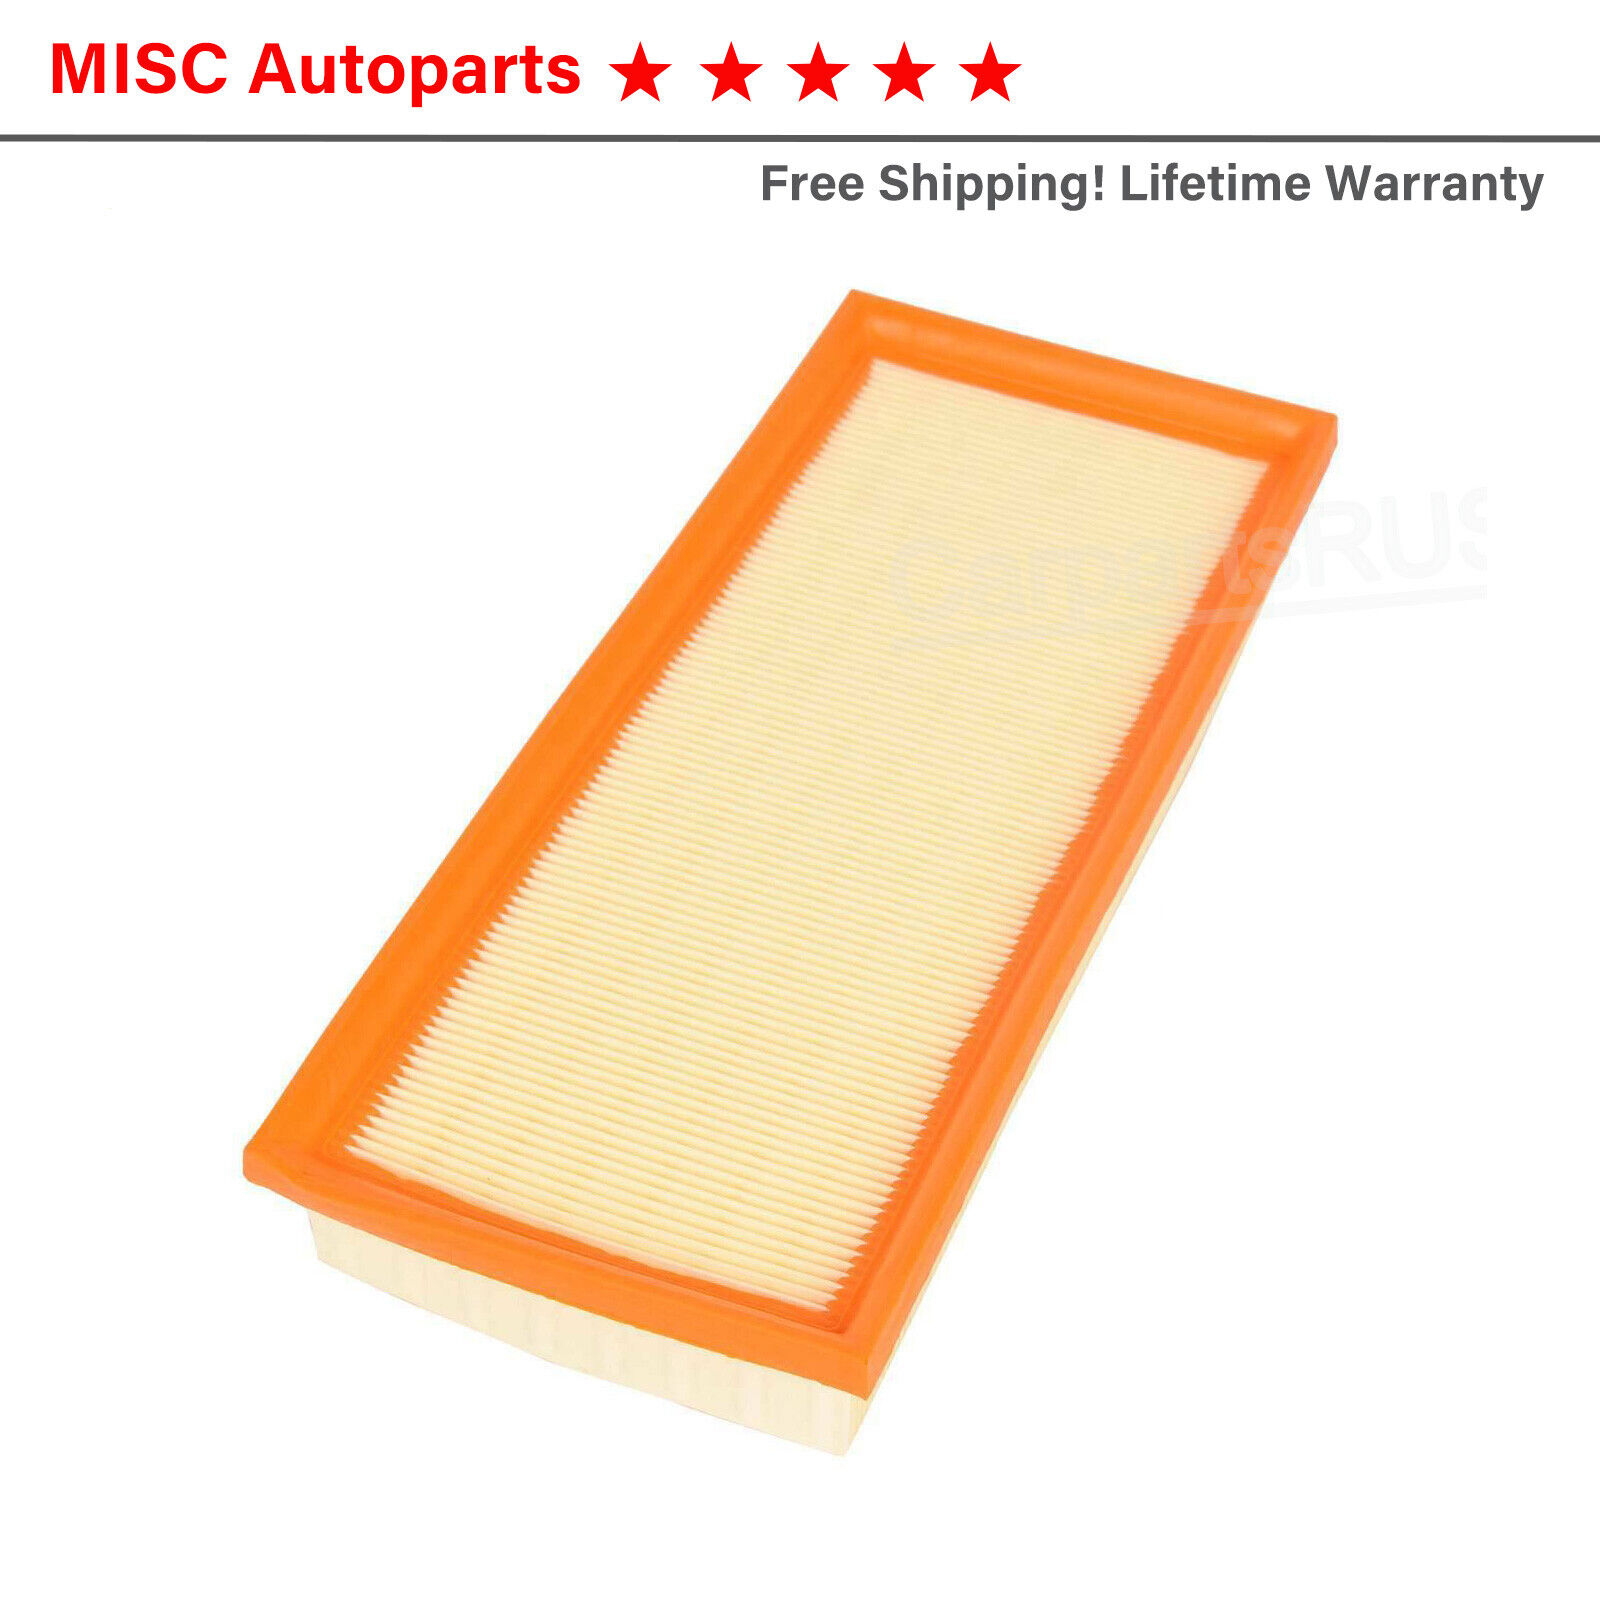 Engine Air Filter For CL550 CLS500 E500 E550 GL450 AMG CL63 CLS63 GL63